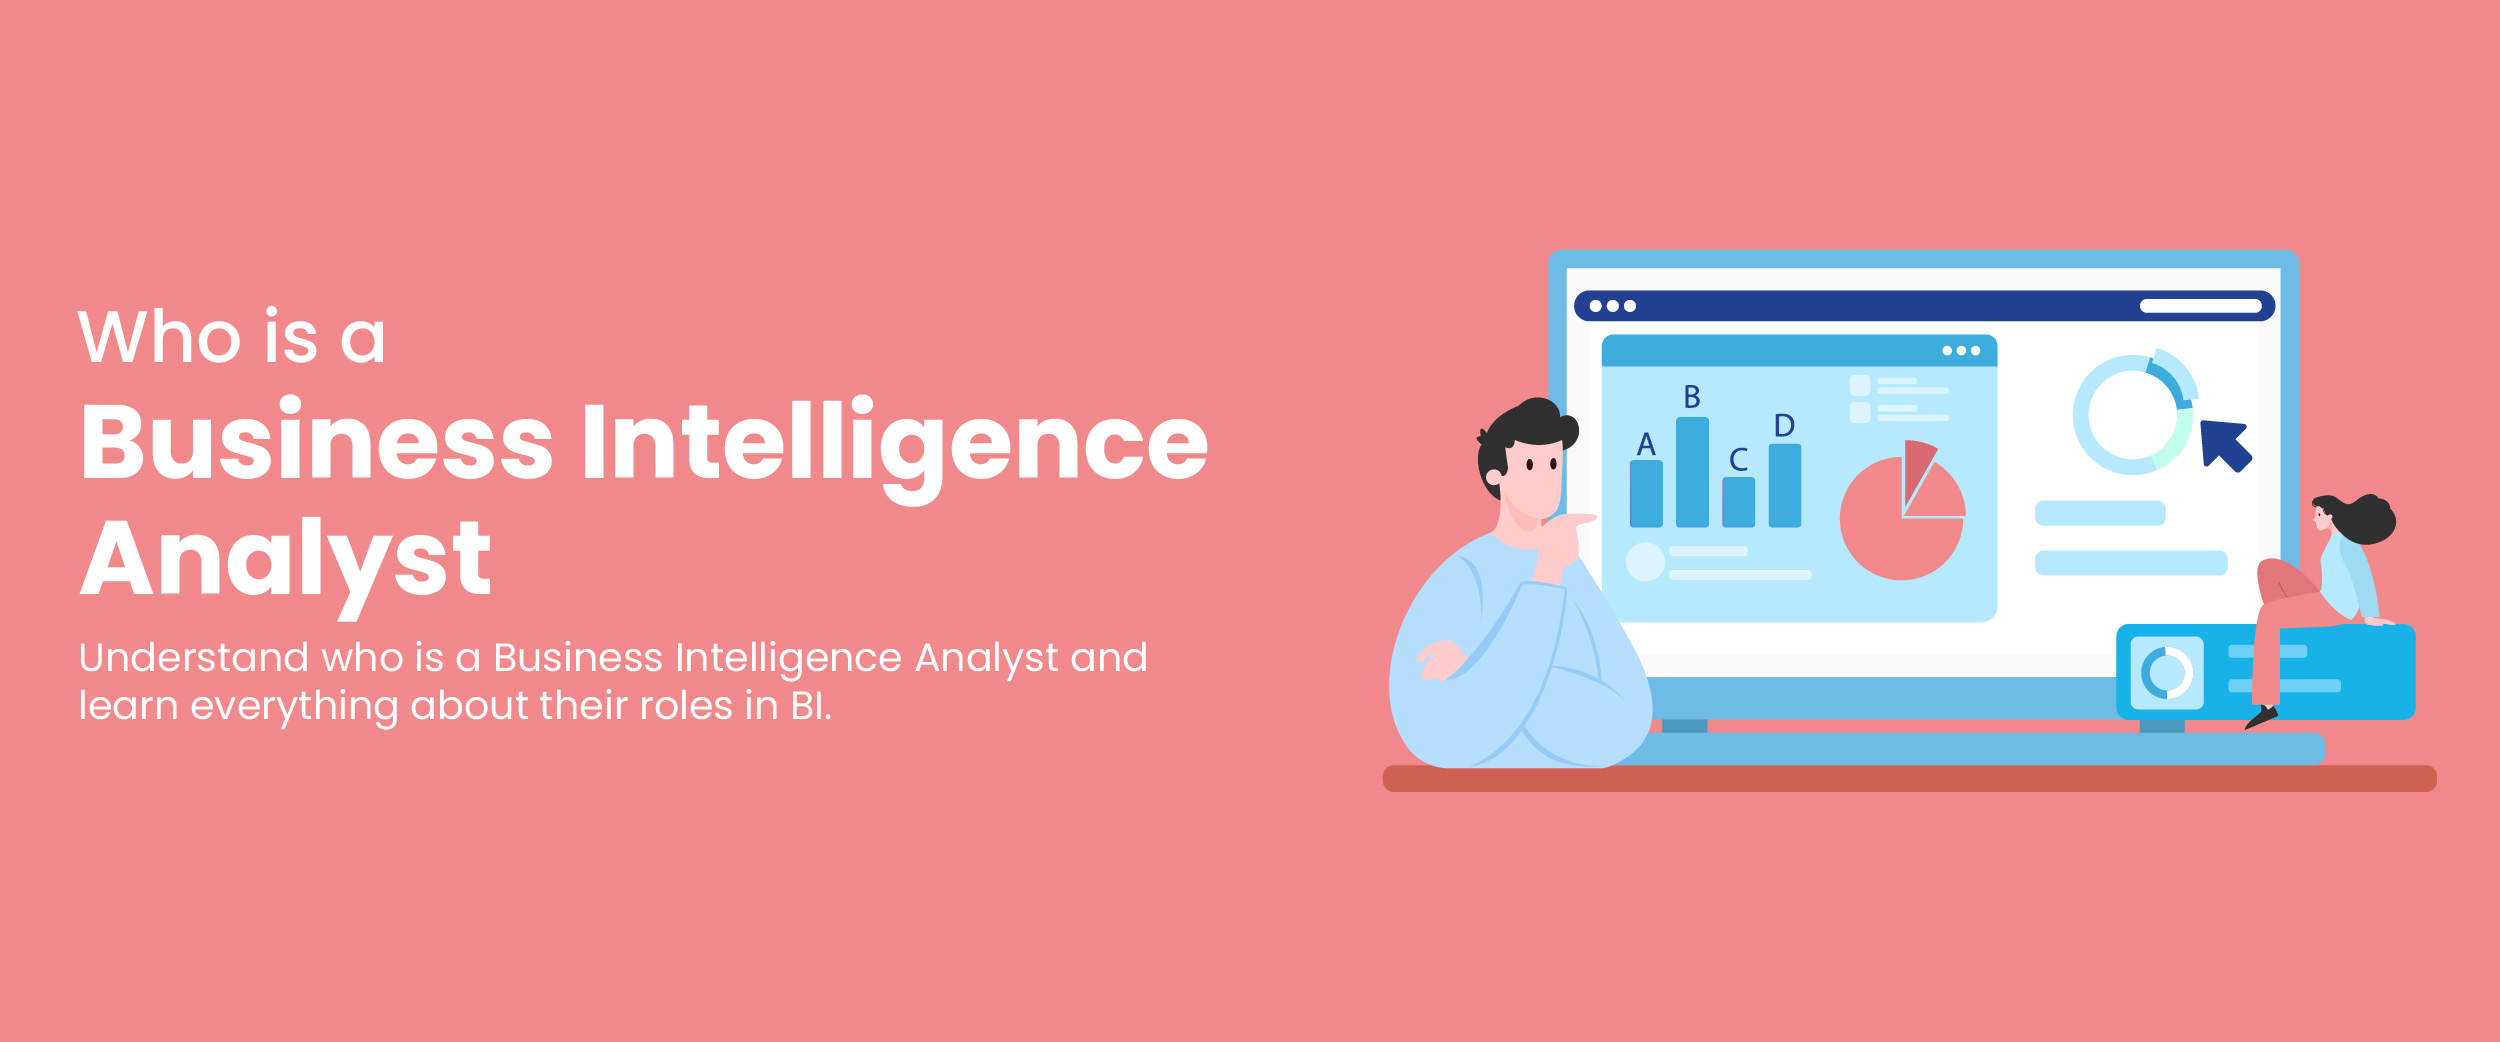 Who is a Business Intelligence Analyst?